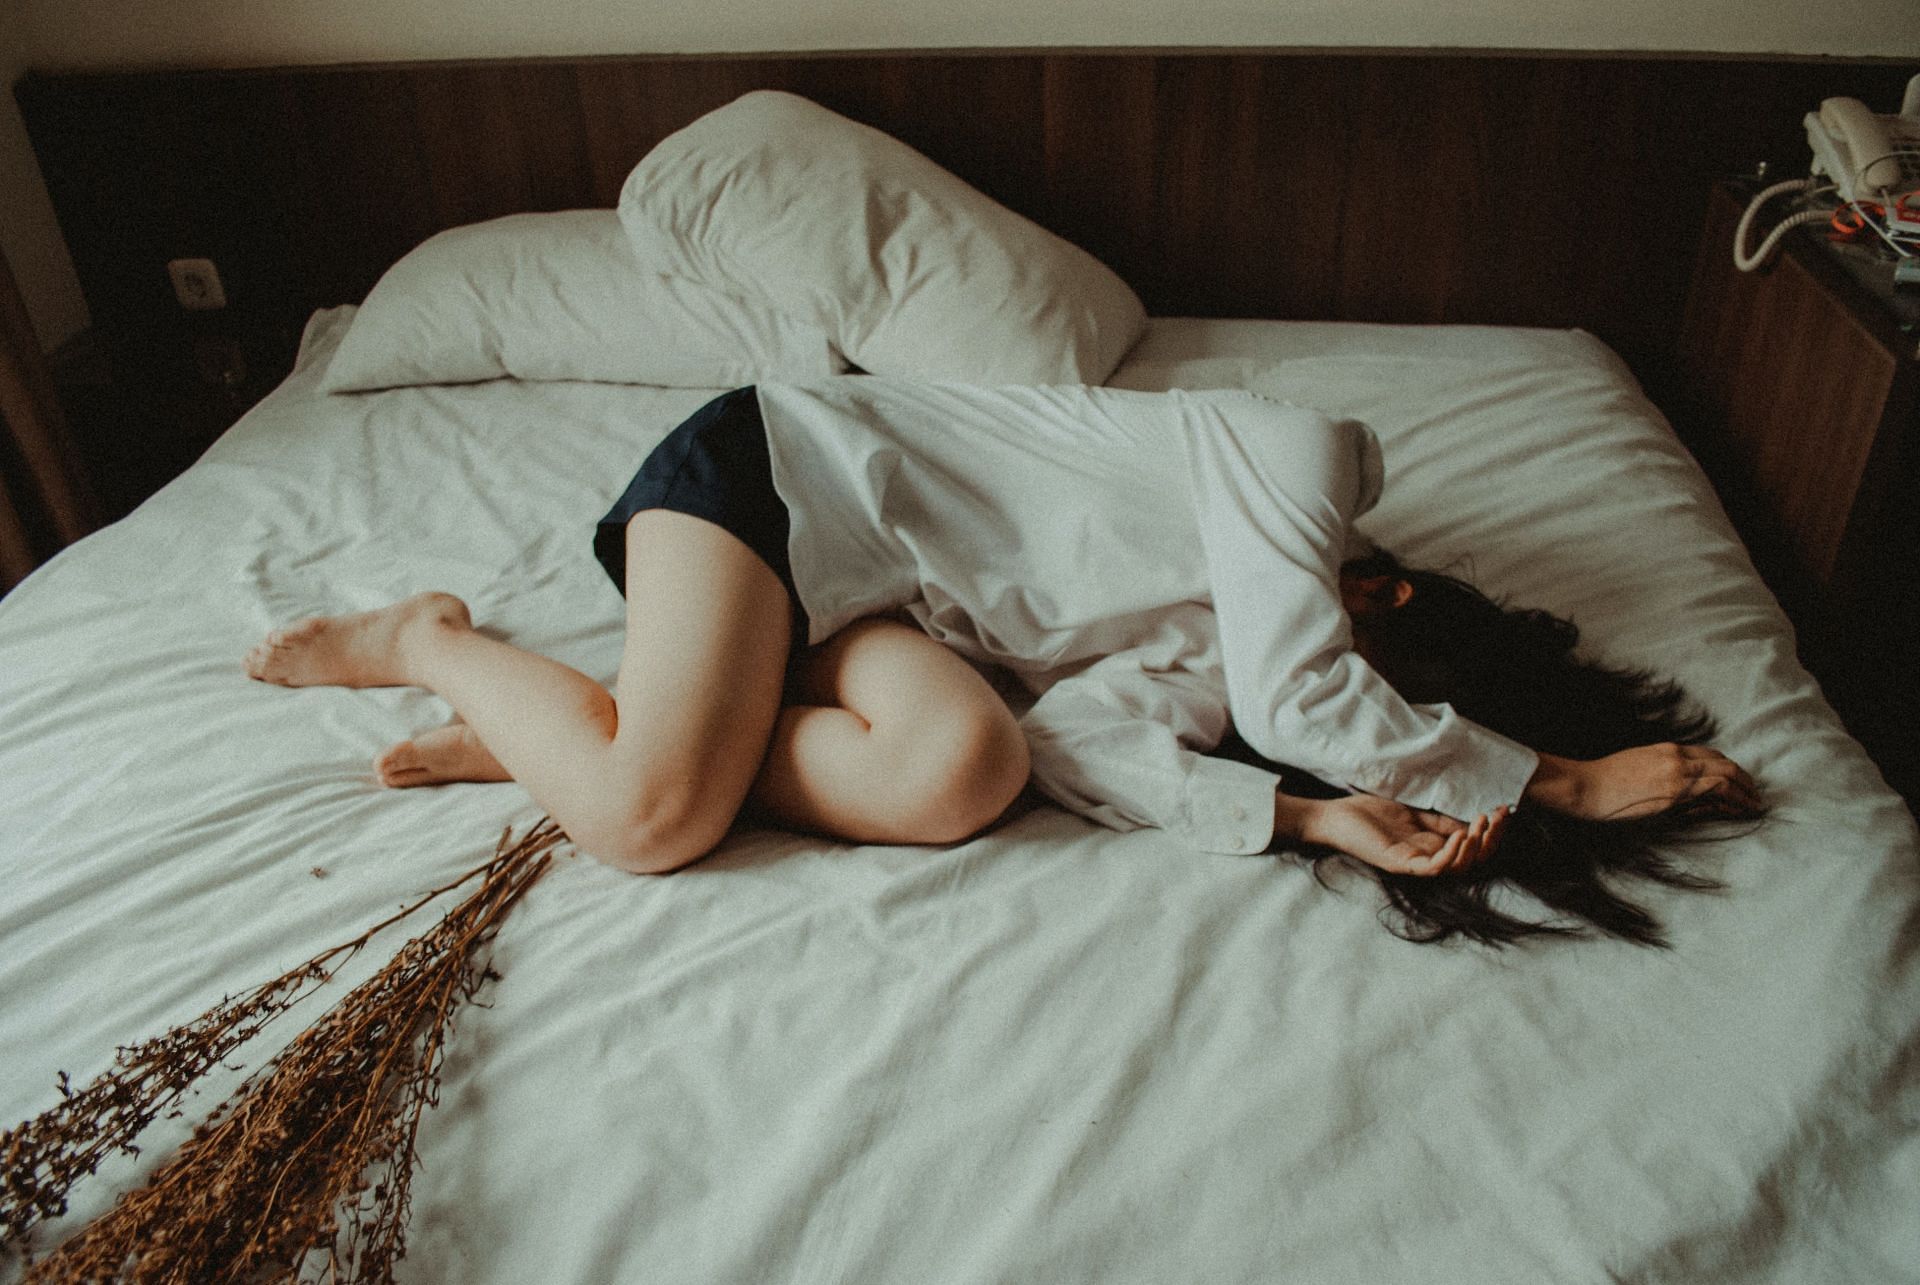 IBS can also cause bloating. (Image via Unsplash / Yuris Alhumaydy)